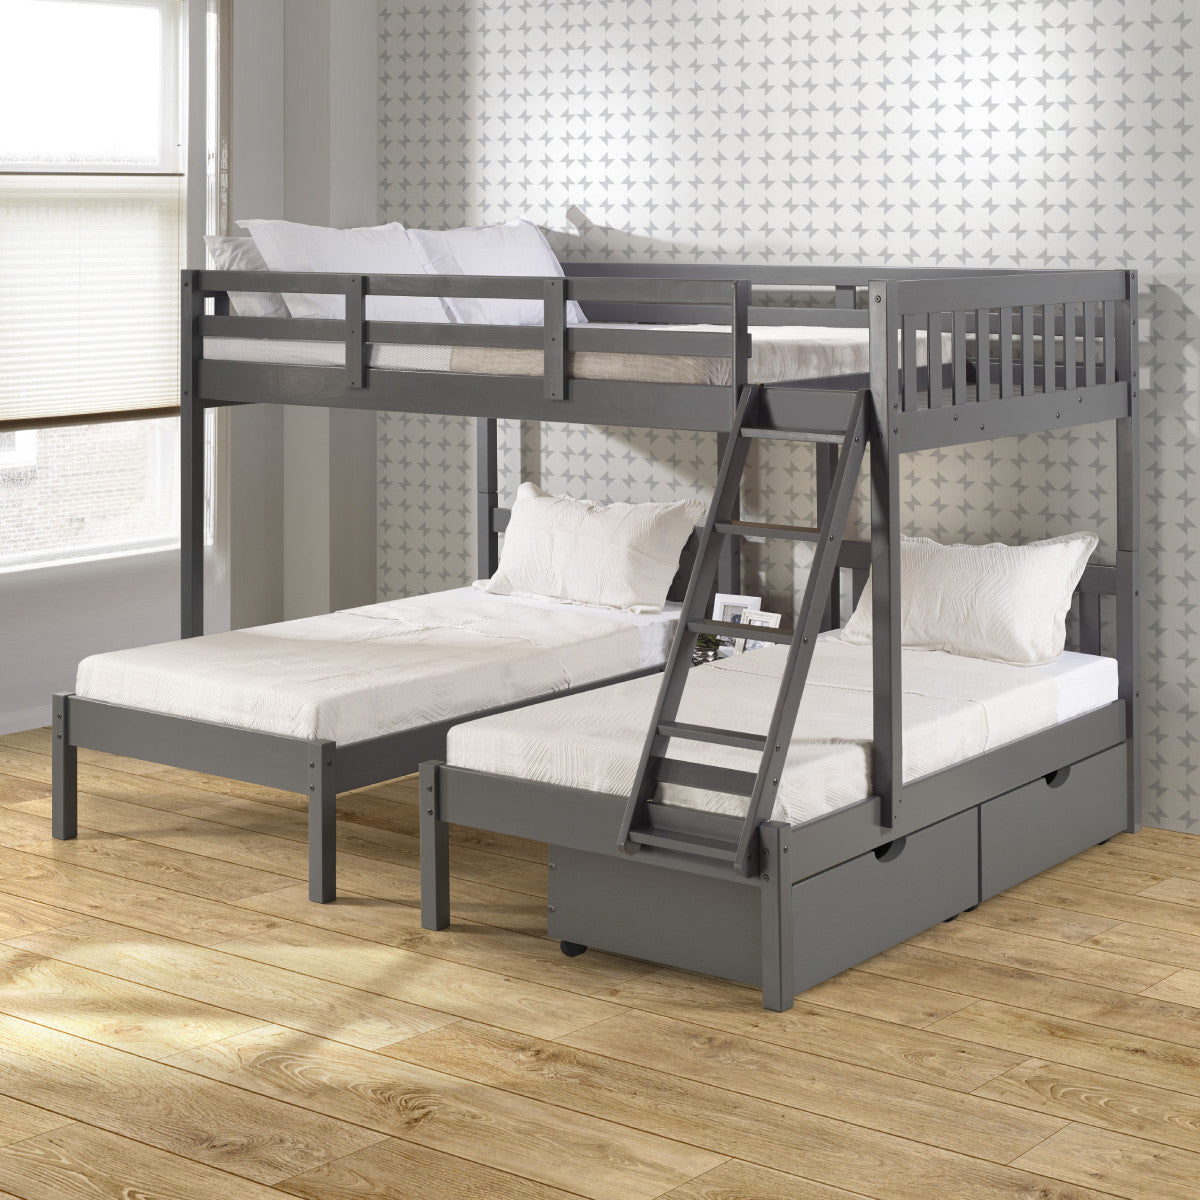 FULL OVER DOUBLE TWIN BED LOFT BUNK IN DARK GREY FINISH W/DUAL UNDER BED DRAWERS